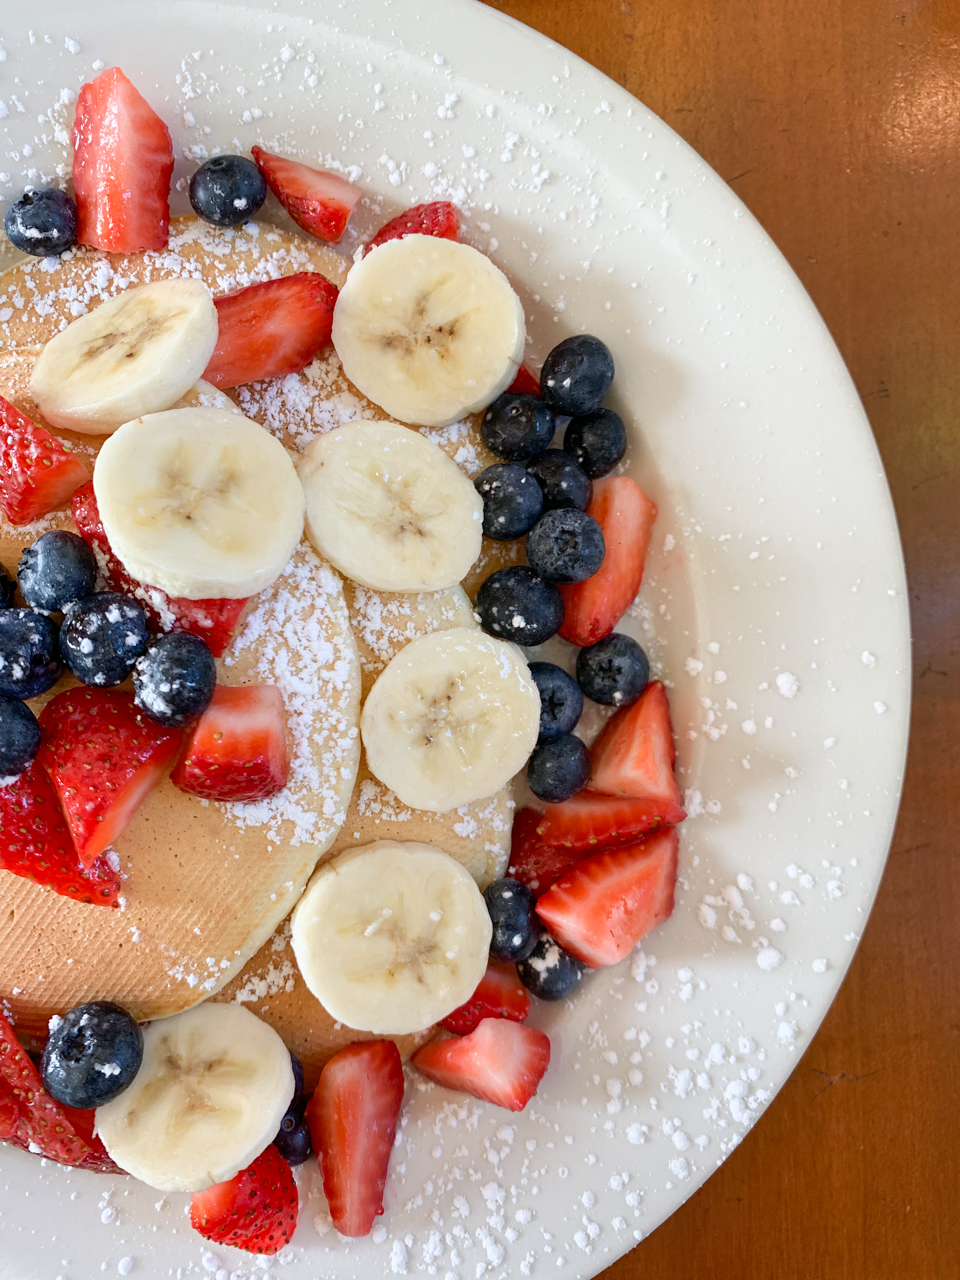 Little House Cafe | New England Foodie Guide: Top 8 Restaurants in Martha's Vineyard You Must Try by popular New England Food Blogger, Shannon Shipman: image of pancakes at Little House Cafe in Martha's Vineyard.